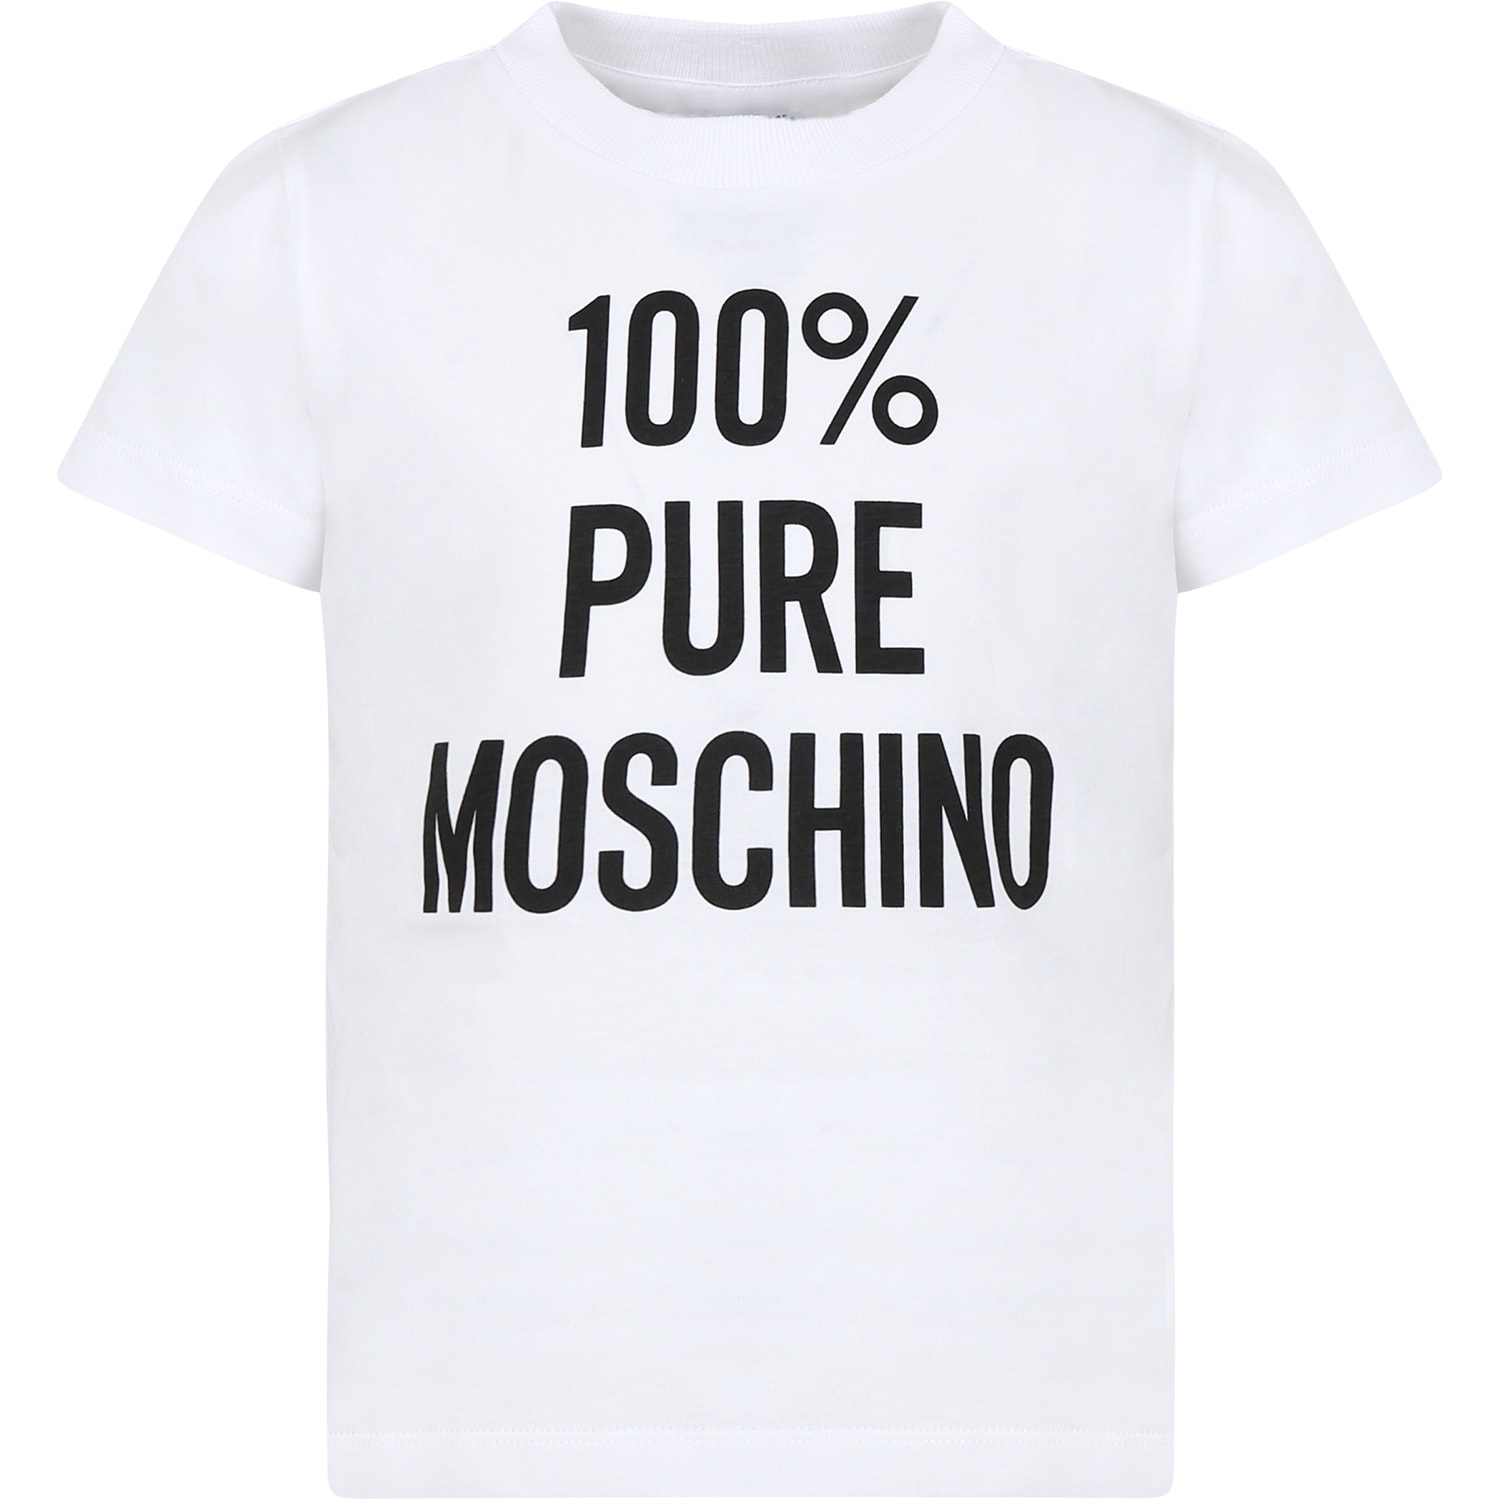 Moschino White T-shirt For Kids With Black Print